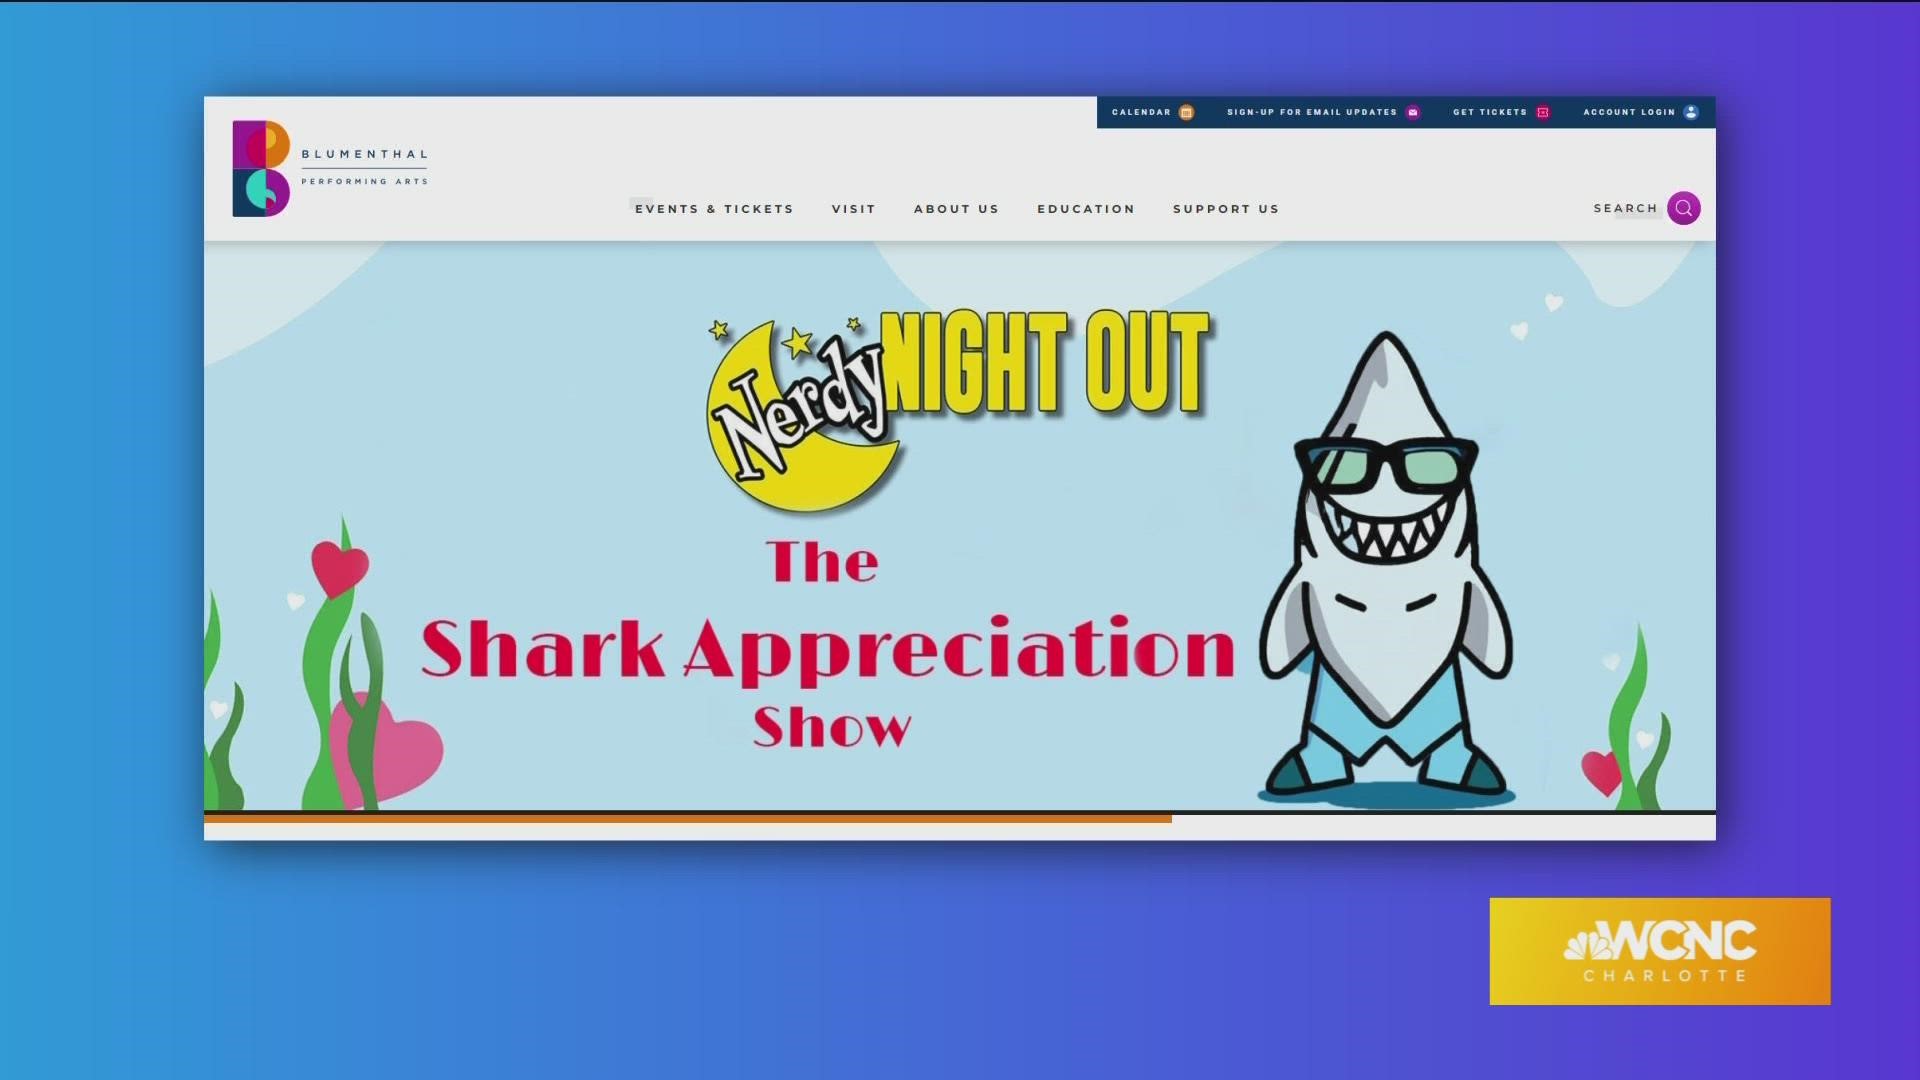 The Nerdy Night Out: The Shark Appreciation Show!